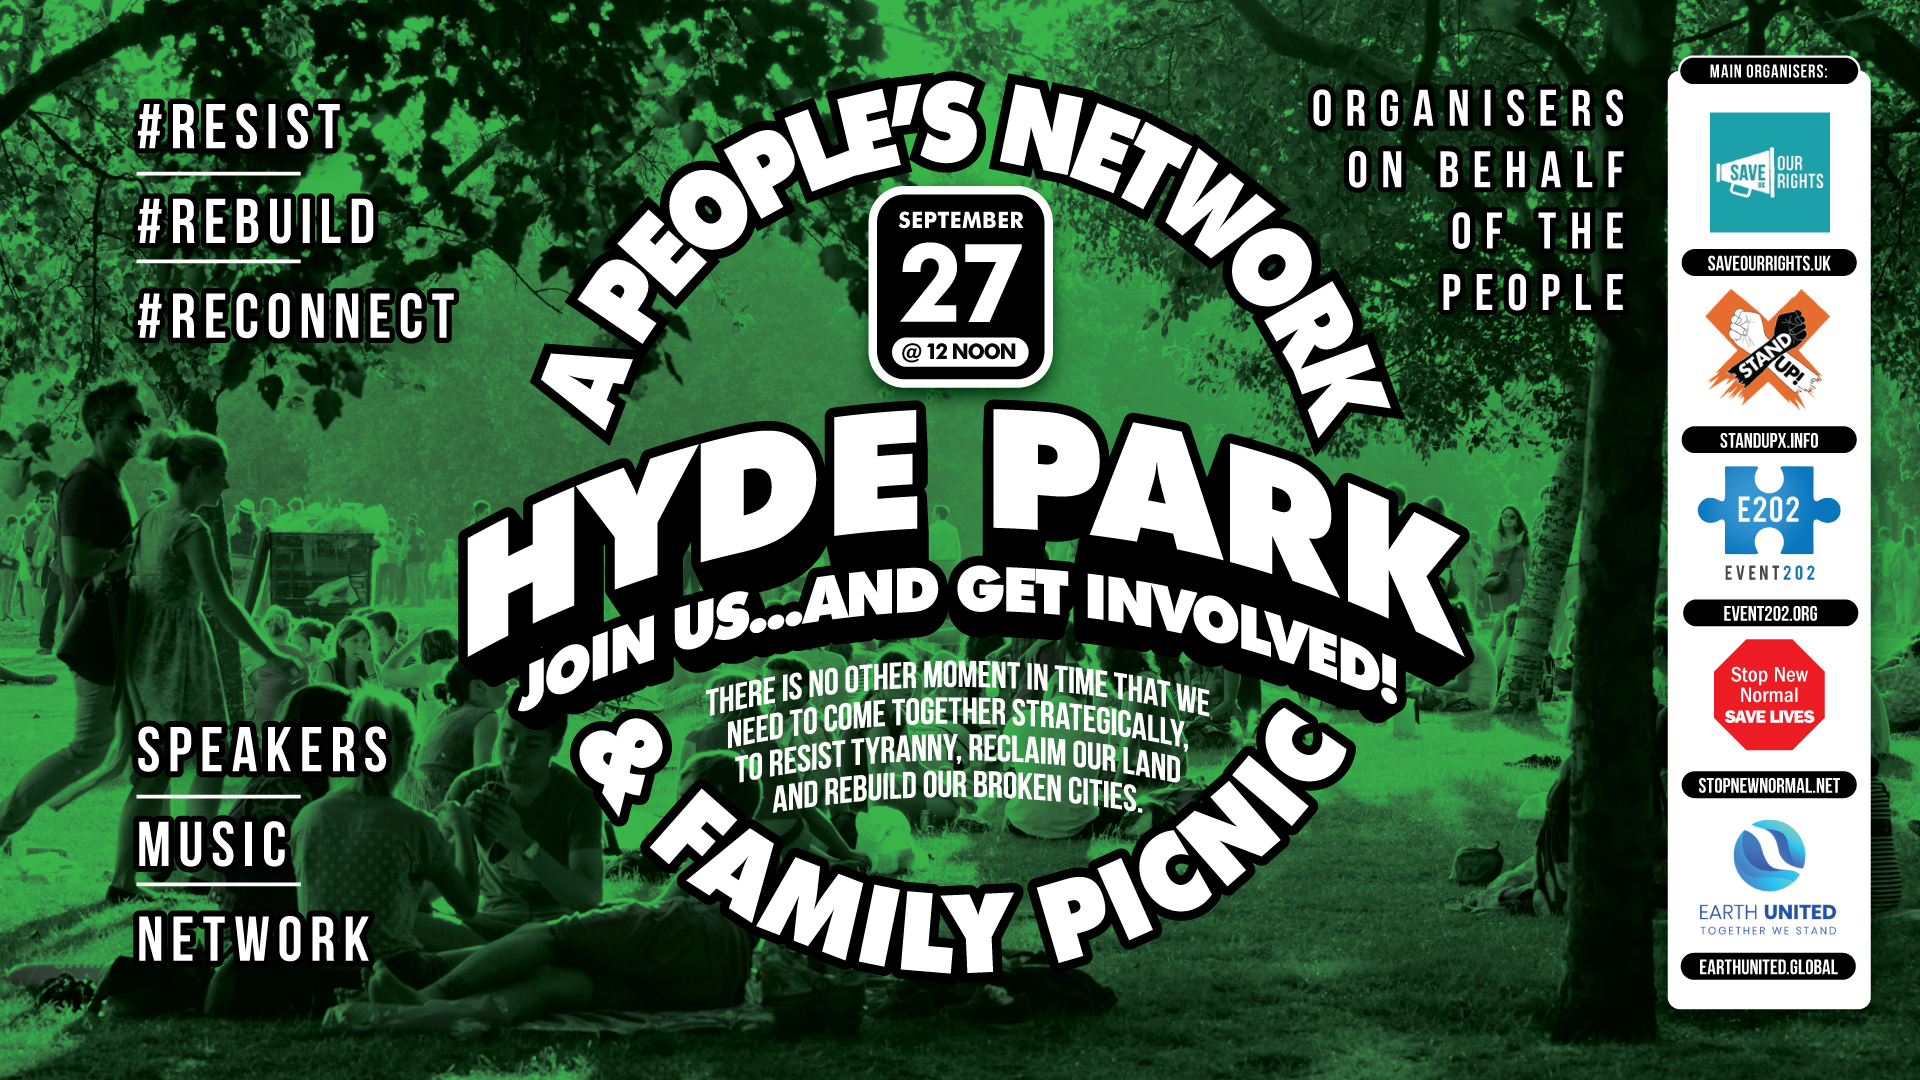 A People’s Network & Family Picnic